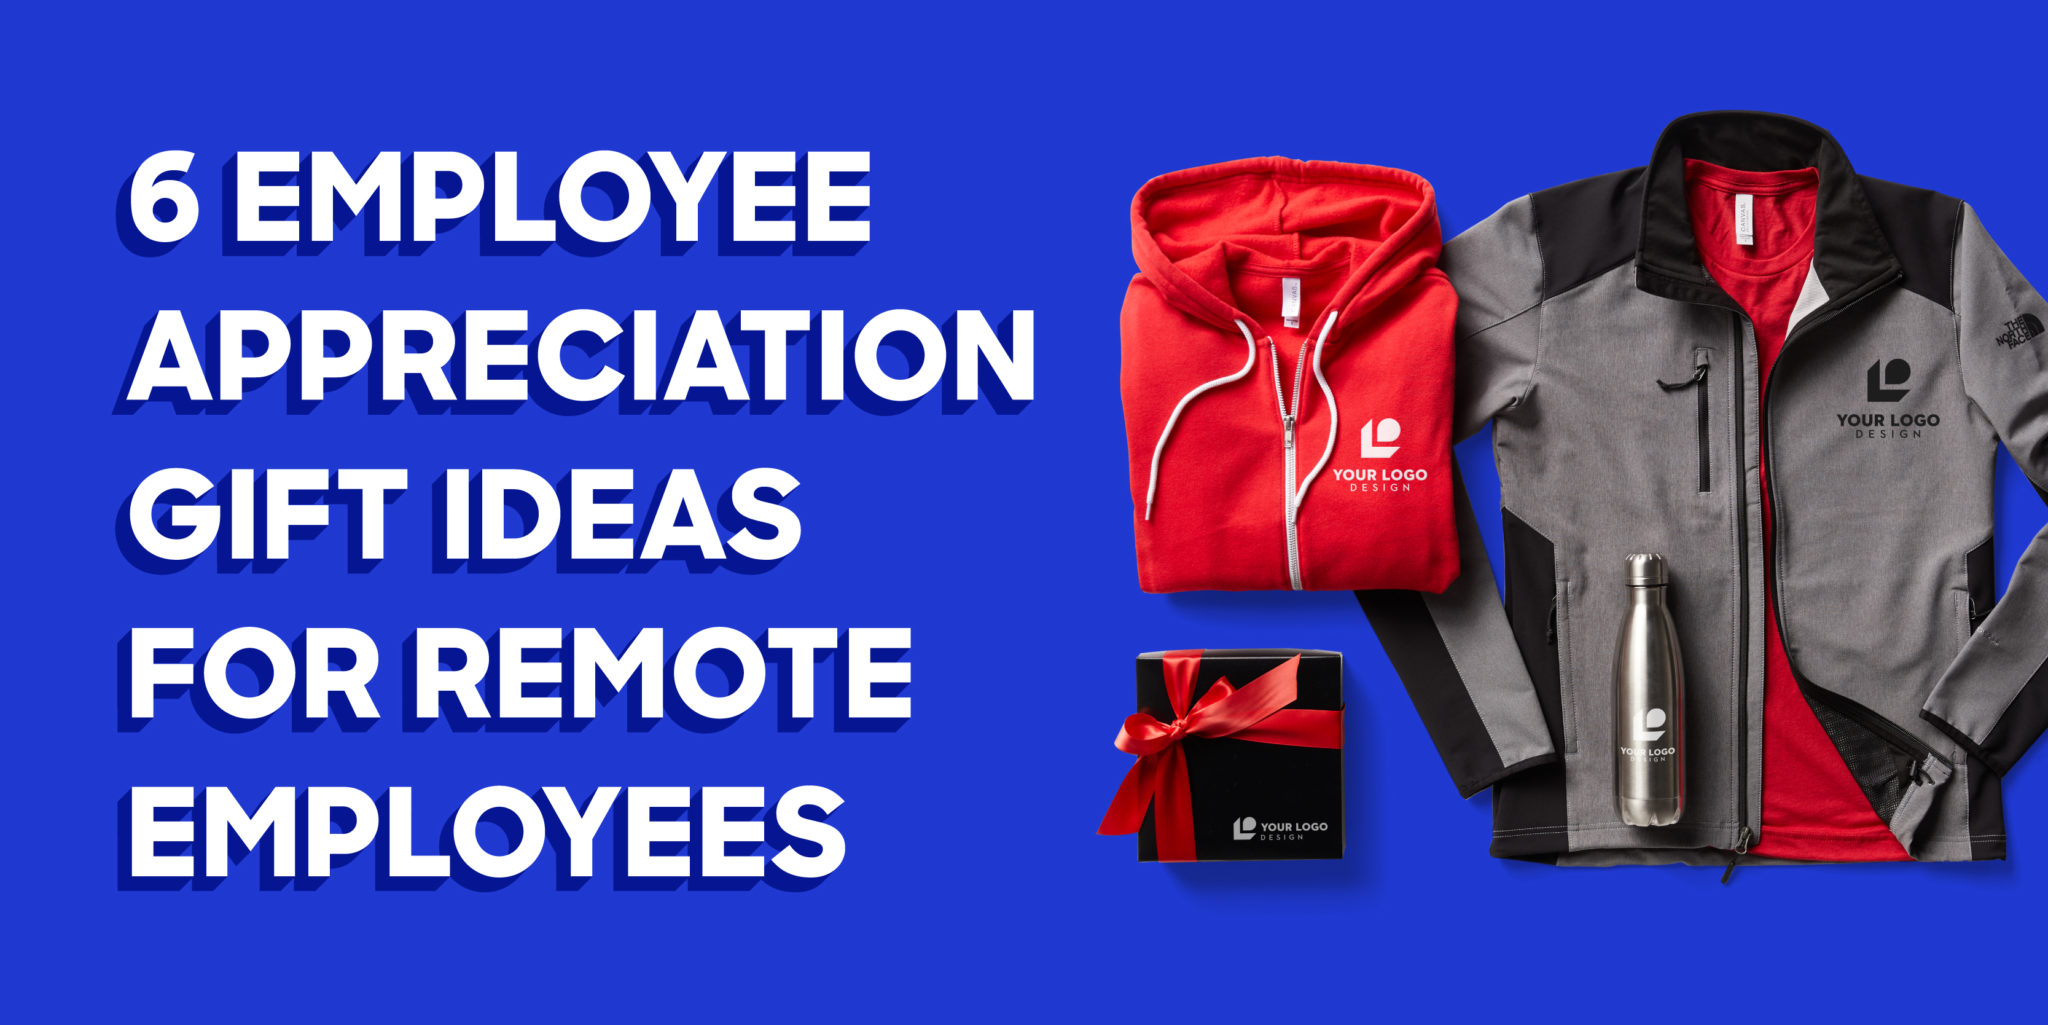 Title says 6 Employee Appreciation Gift Ideas for Remote Employees and it shows a custom box of chocolates with a red bow, a red custom sweatshirt, and a grey custom jacket.